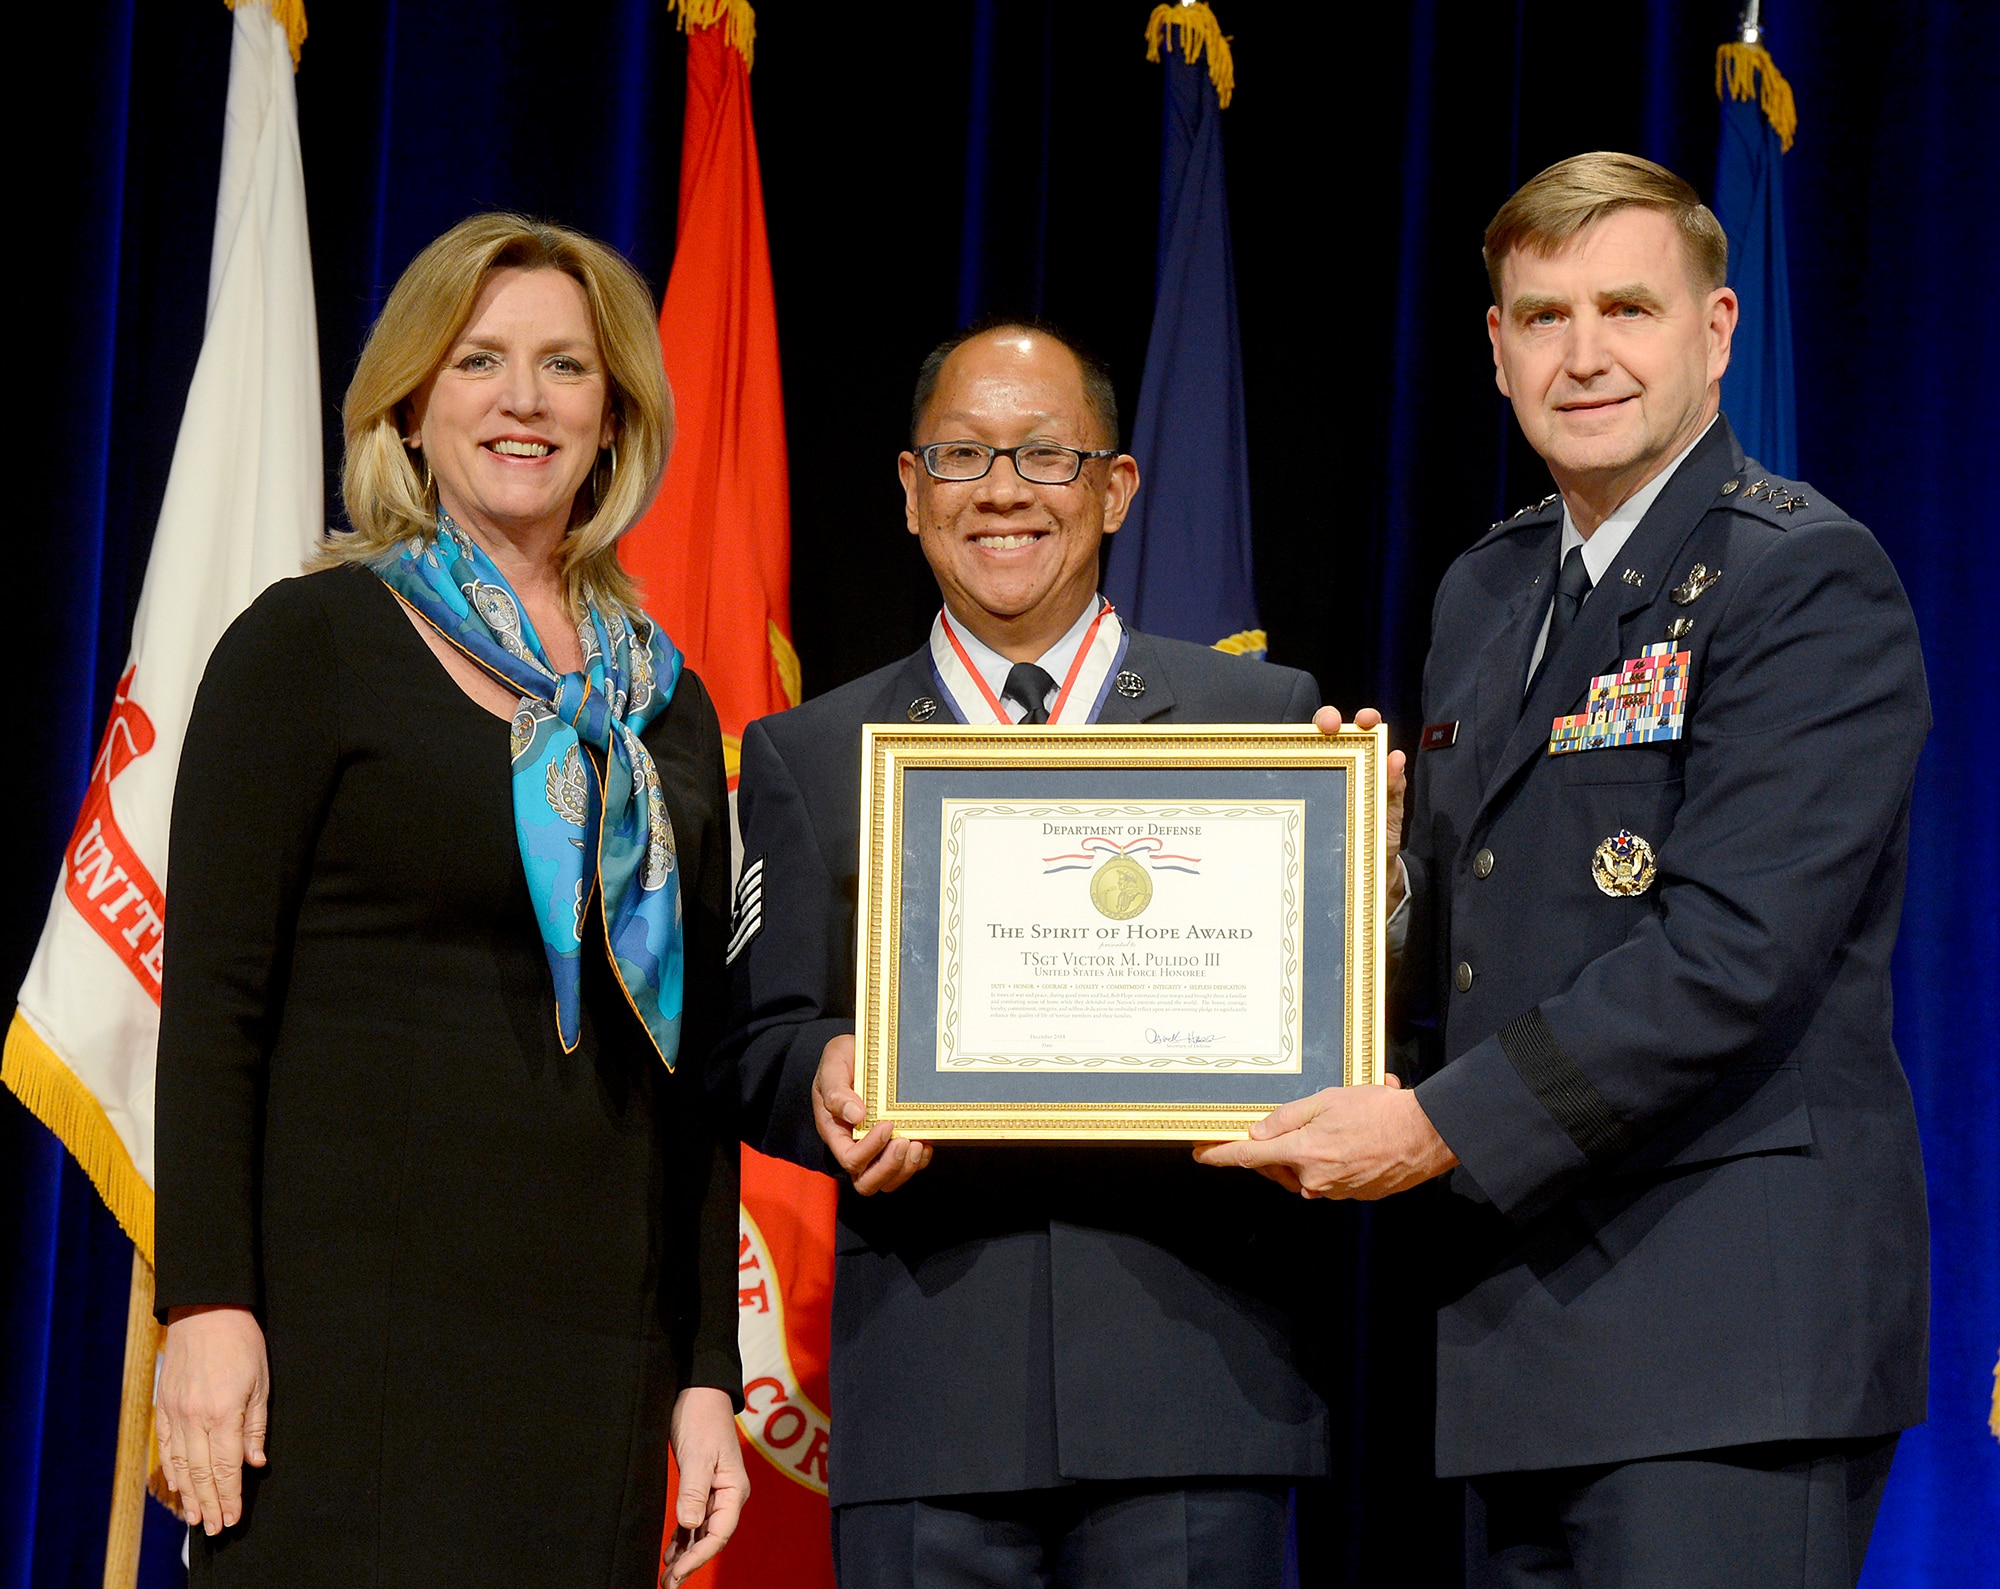 Secretary of the Air Force Deborah Lee James and Air Force Assistant Vice Chief of Staff Lt. Gen. Stephen Hoog present retired Tech. Sgt. Victor Pulido III the Spirit of Hope Award during a ceremony in the Pentagon, Dec. 11, 2014.  The award is presented to individuals or organizations from each of the military services whose patriotism and service to members of the U.S. Armed Forces reflects the patriotism and service of Bob Hope.  (U.S. Air Force photo/Scott M. Ash)   